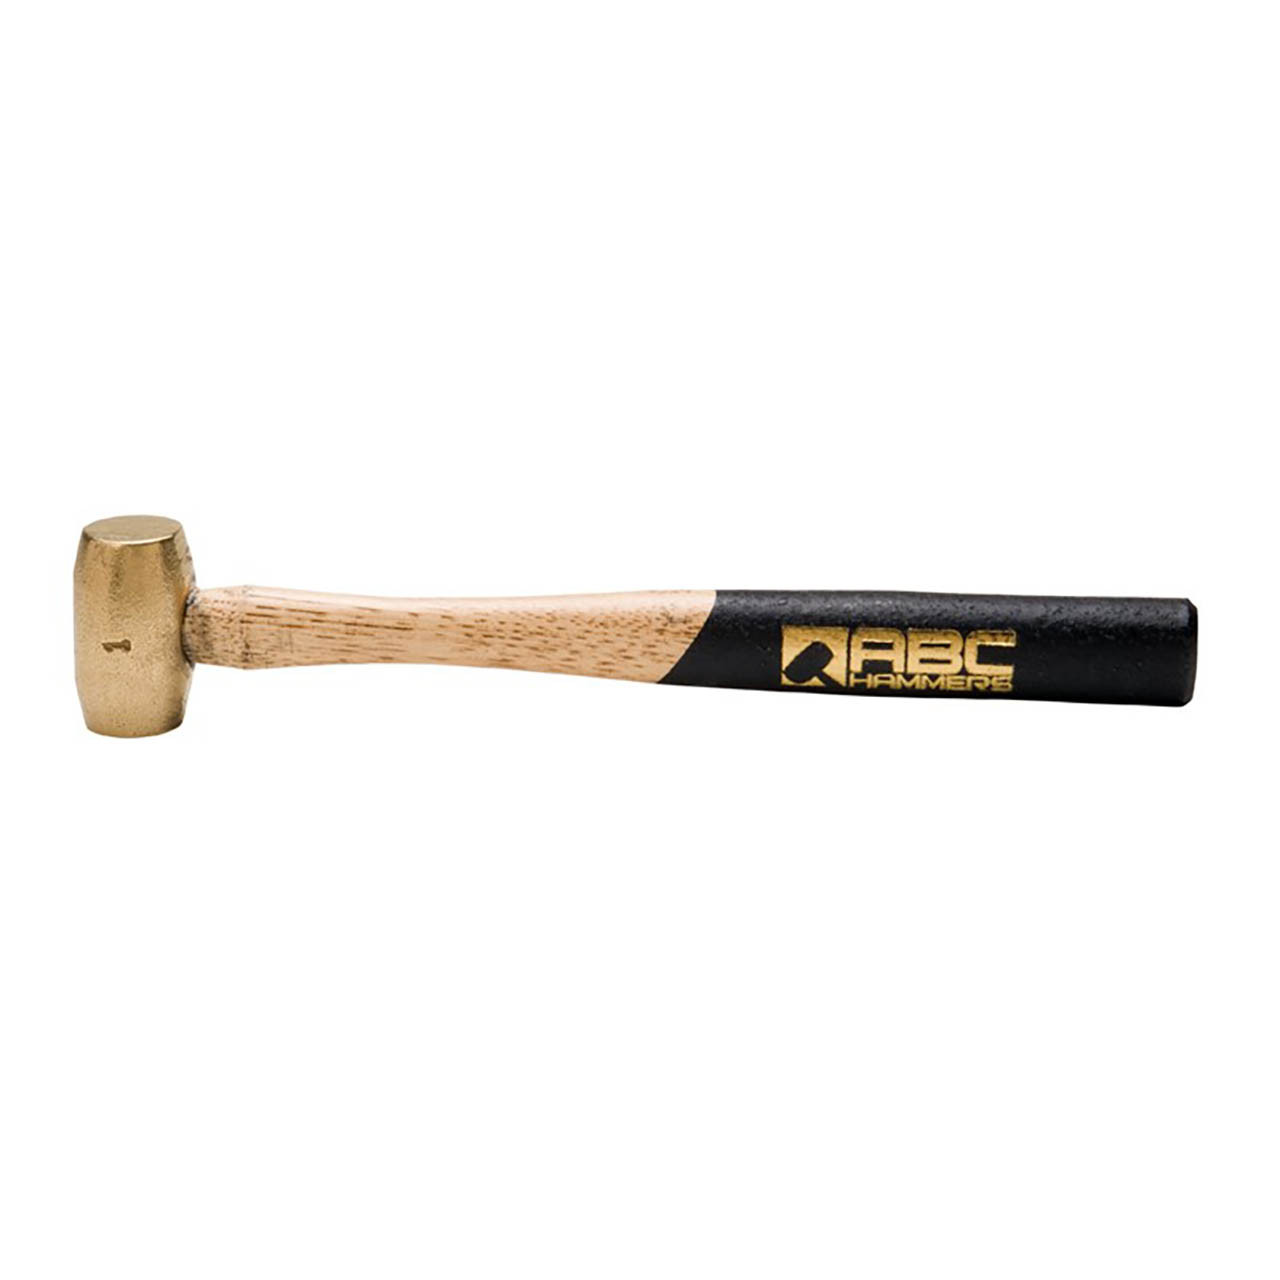 ABC Hammers ABC3BW 3 lb. Brass Hammer with 12.5 Wood Handle